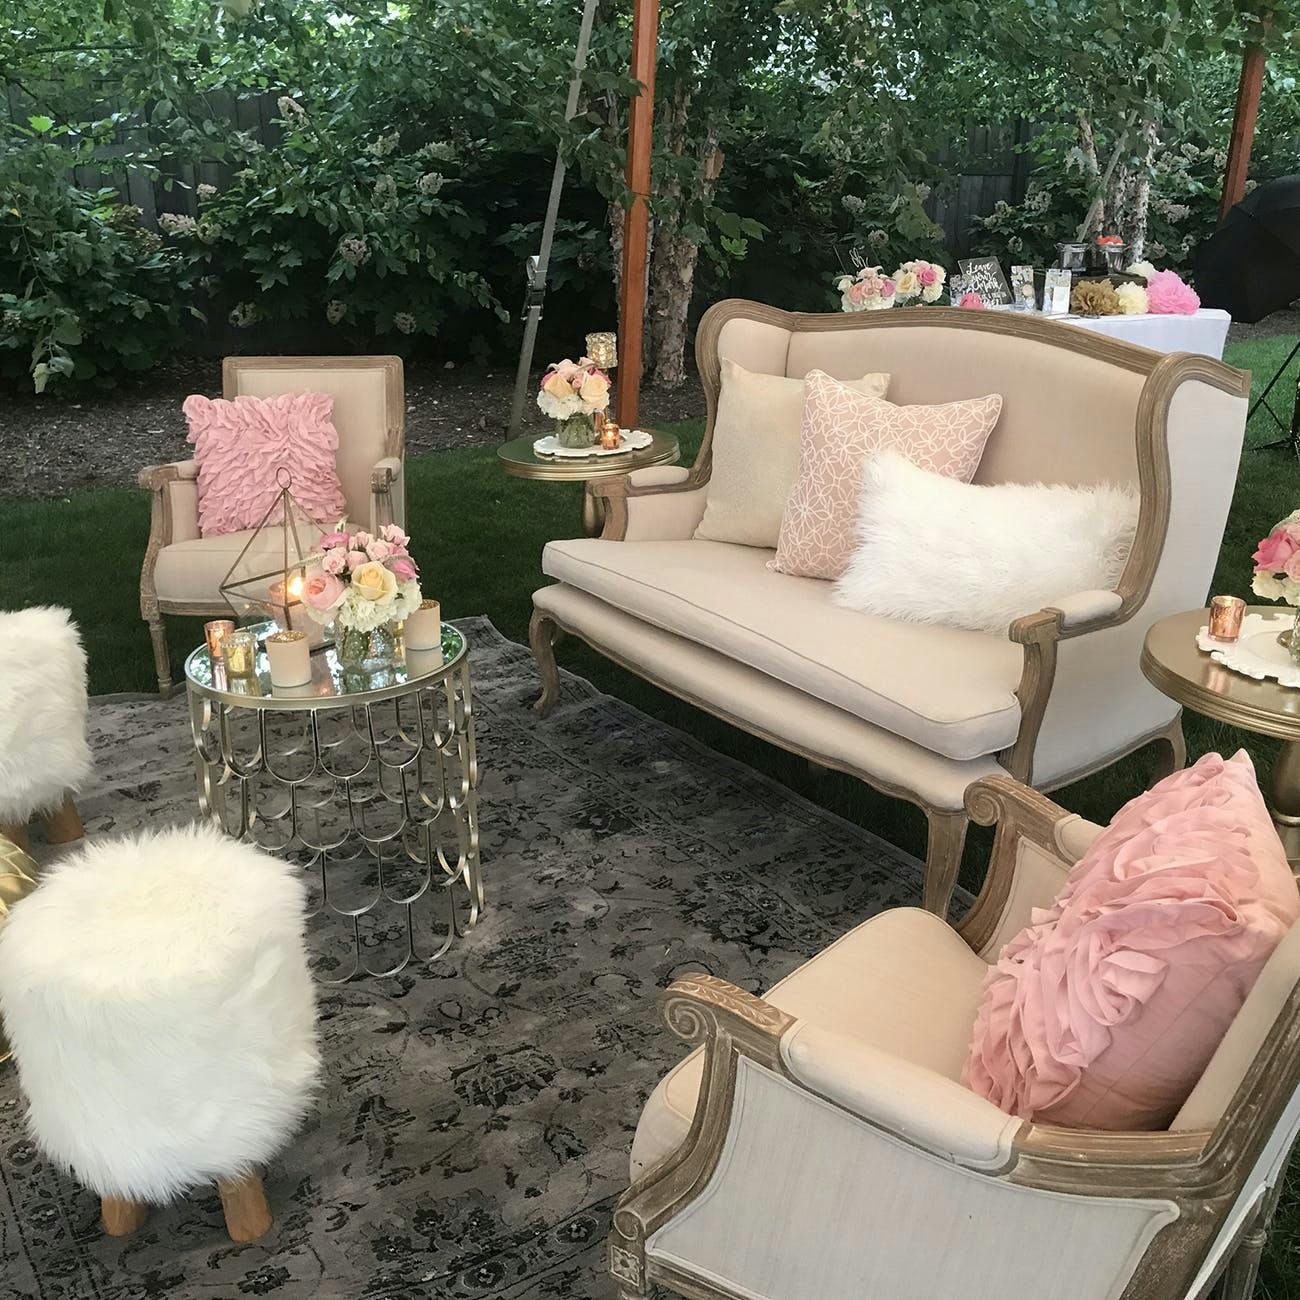 Stunning Outdoor Lounge Area with White Couches, Pink Pillows, and Furry Ottomans